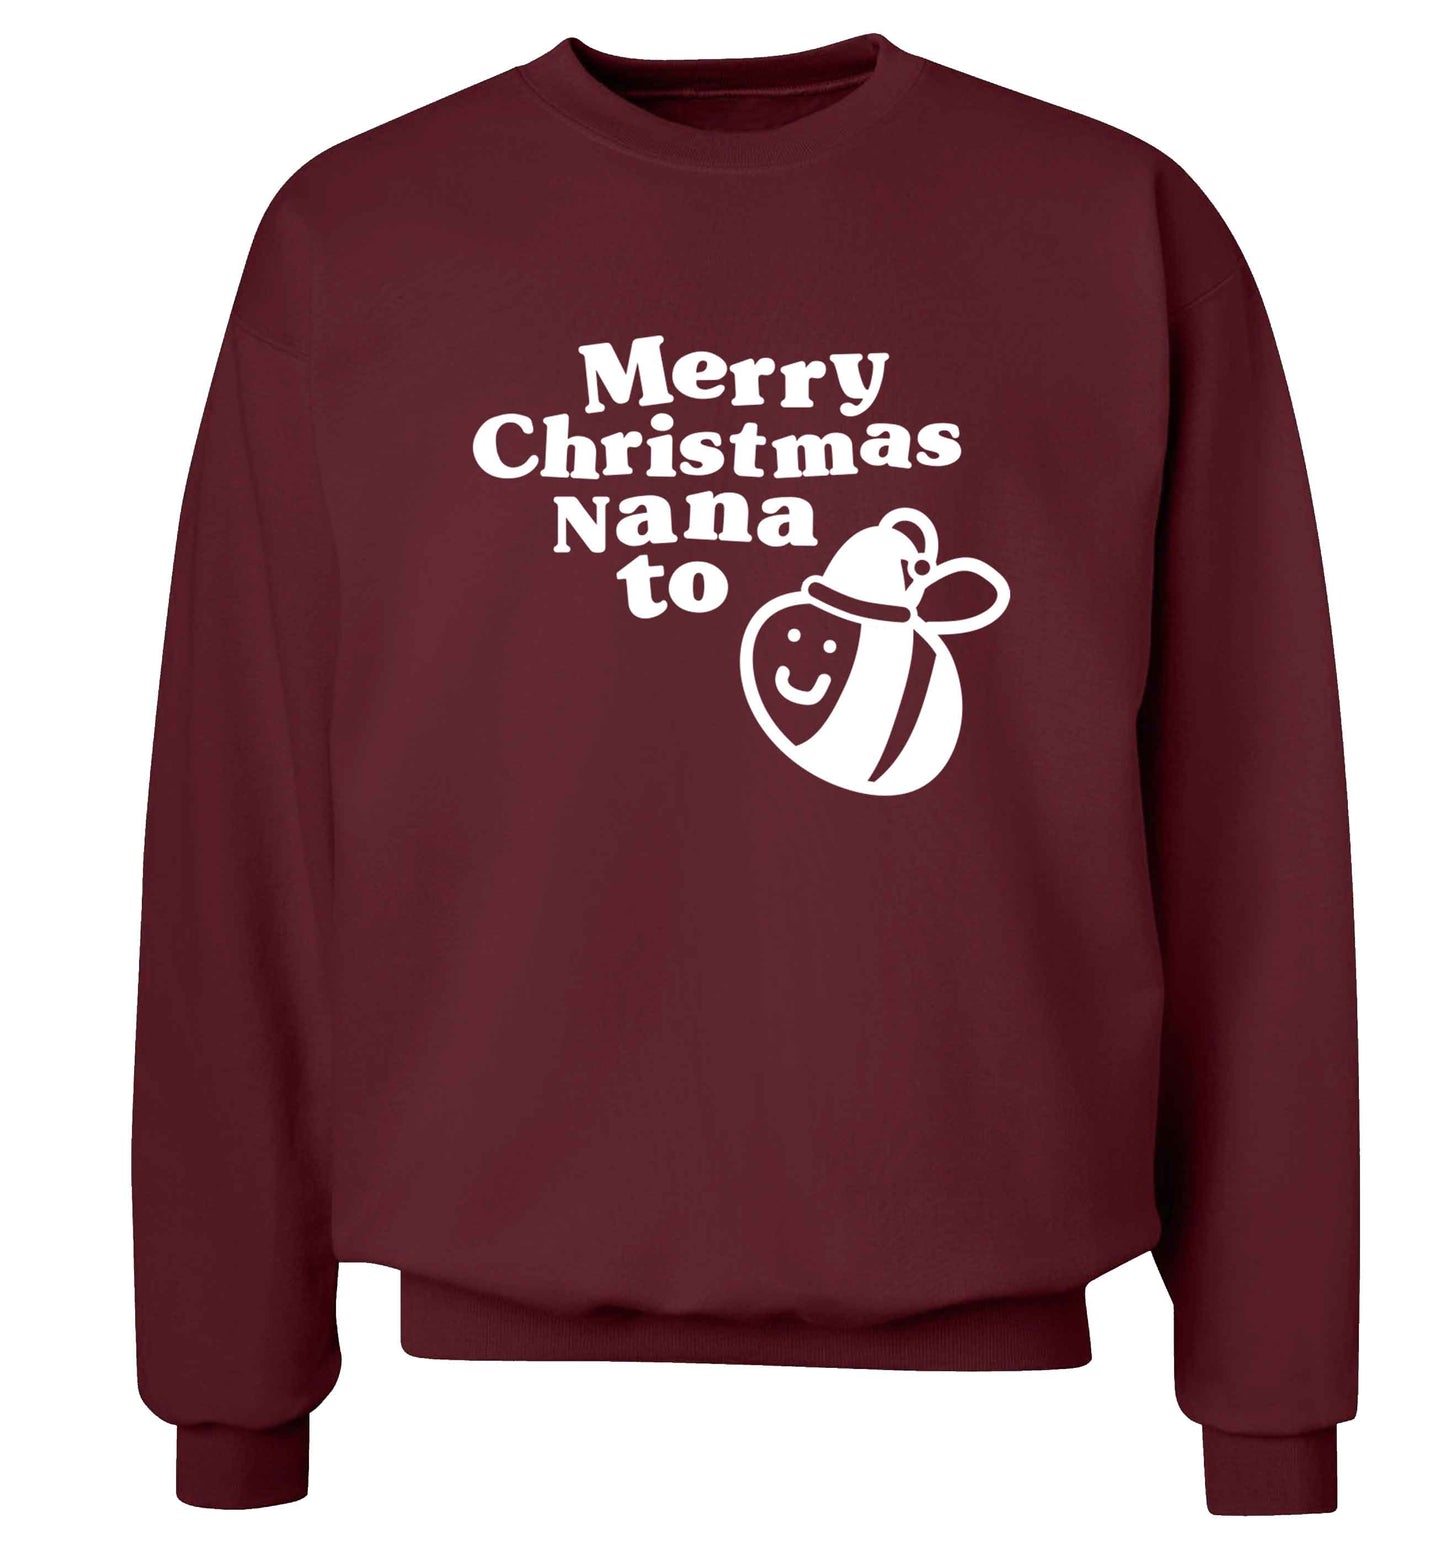 Merry Christmas nana to be Adult's unisex maroon Sweater 2XL